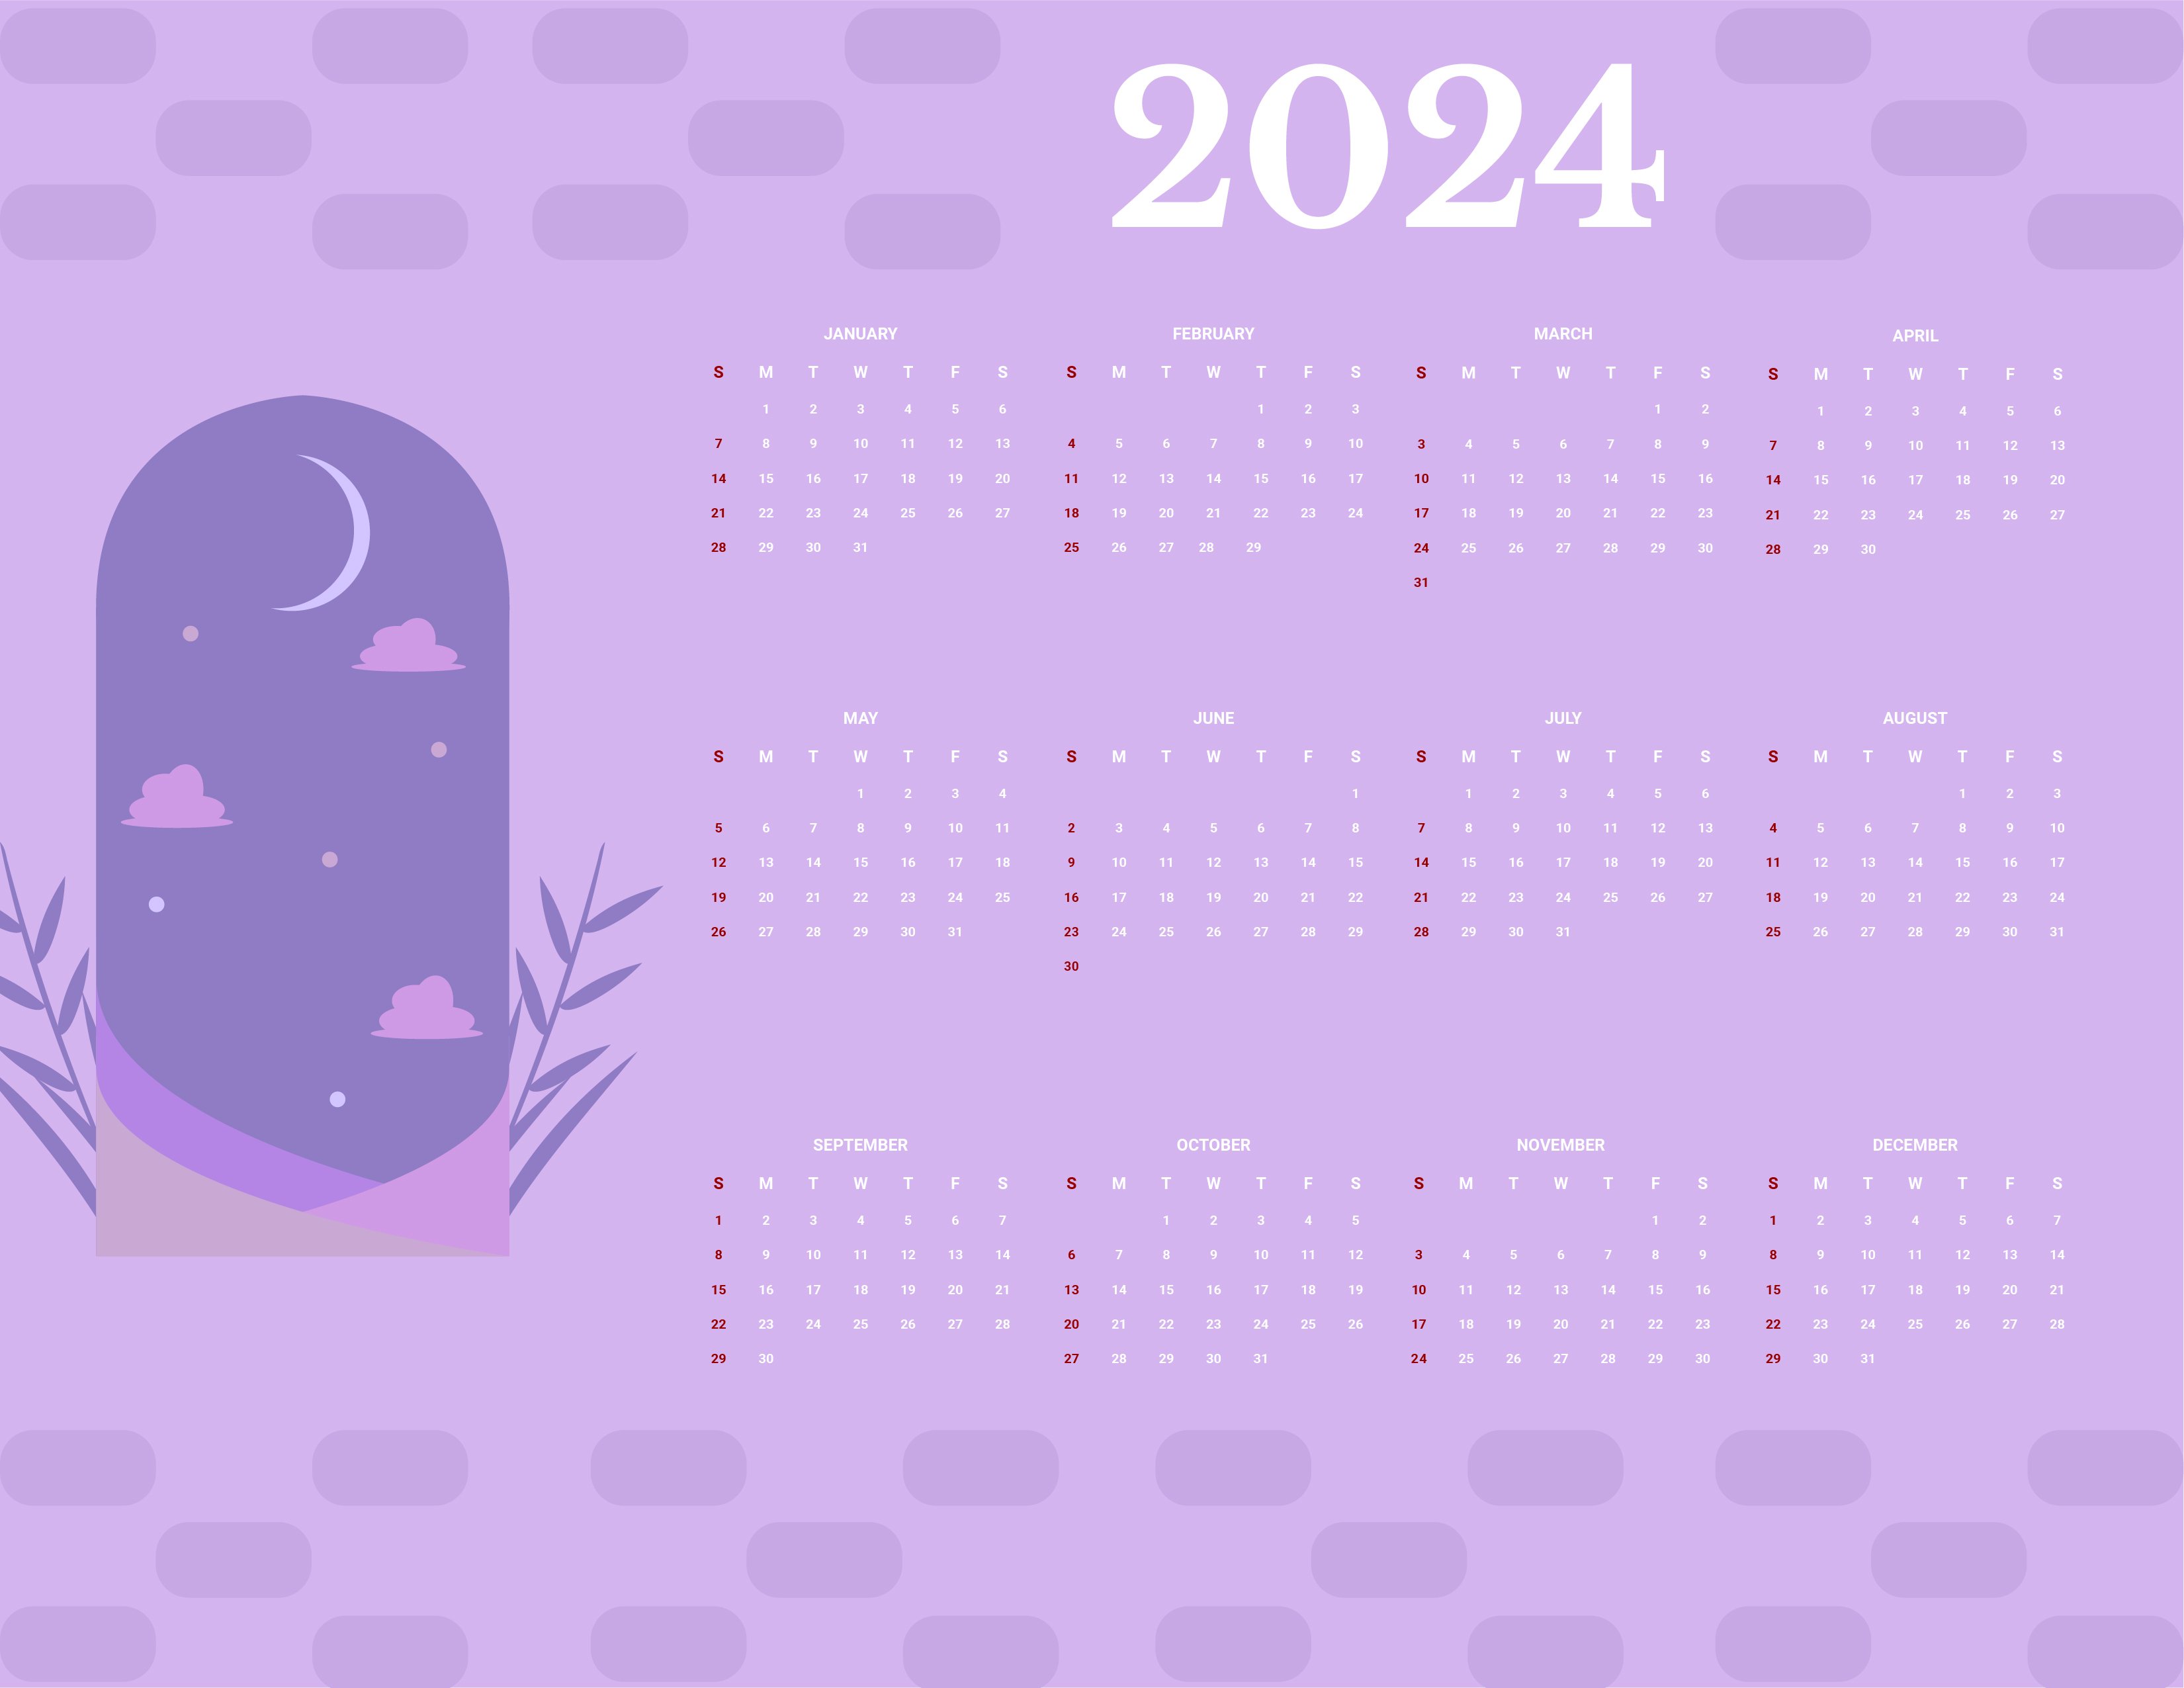 FREE Year 2024 Calendar Template Download in Word, Google Docs, Excel